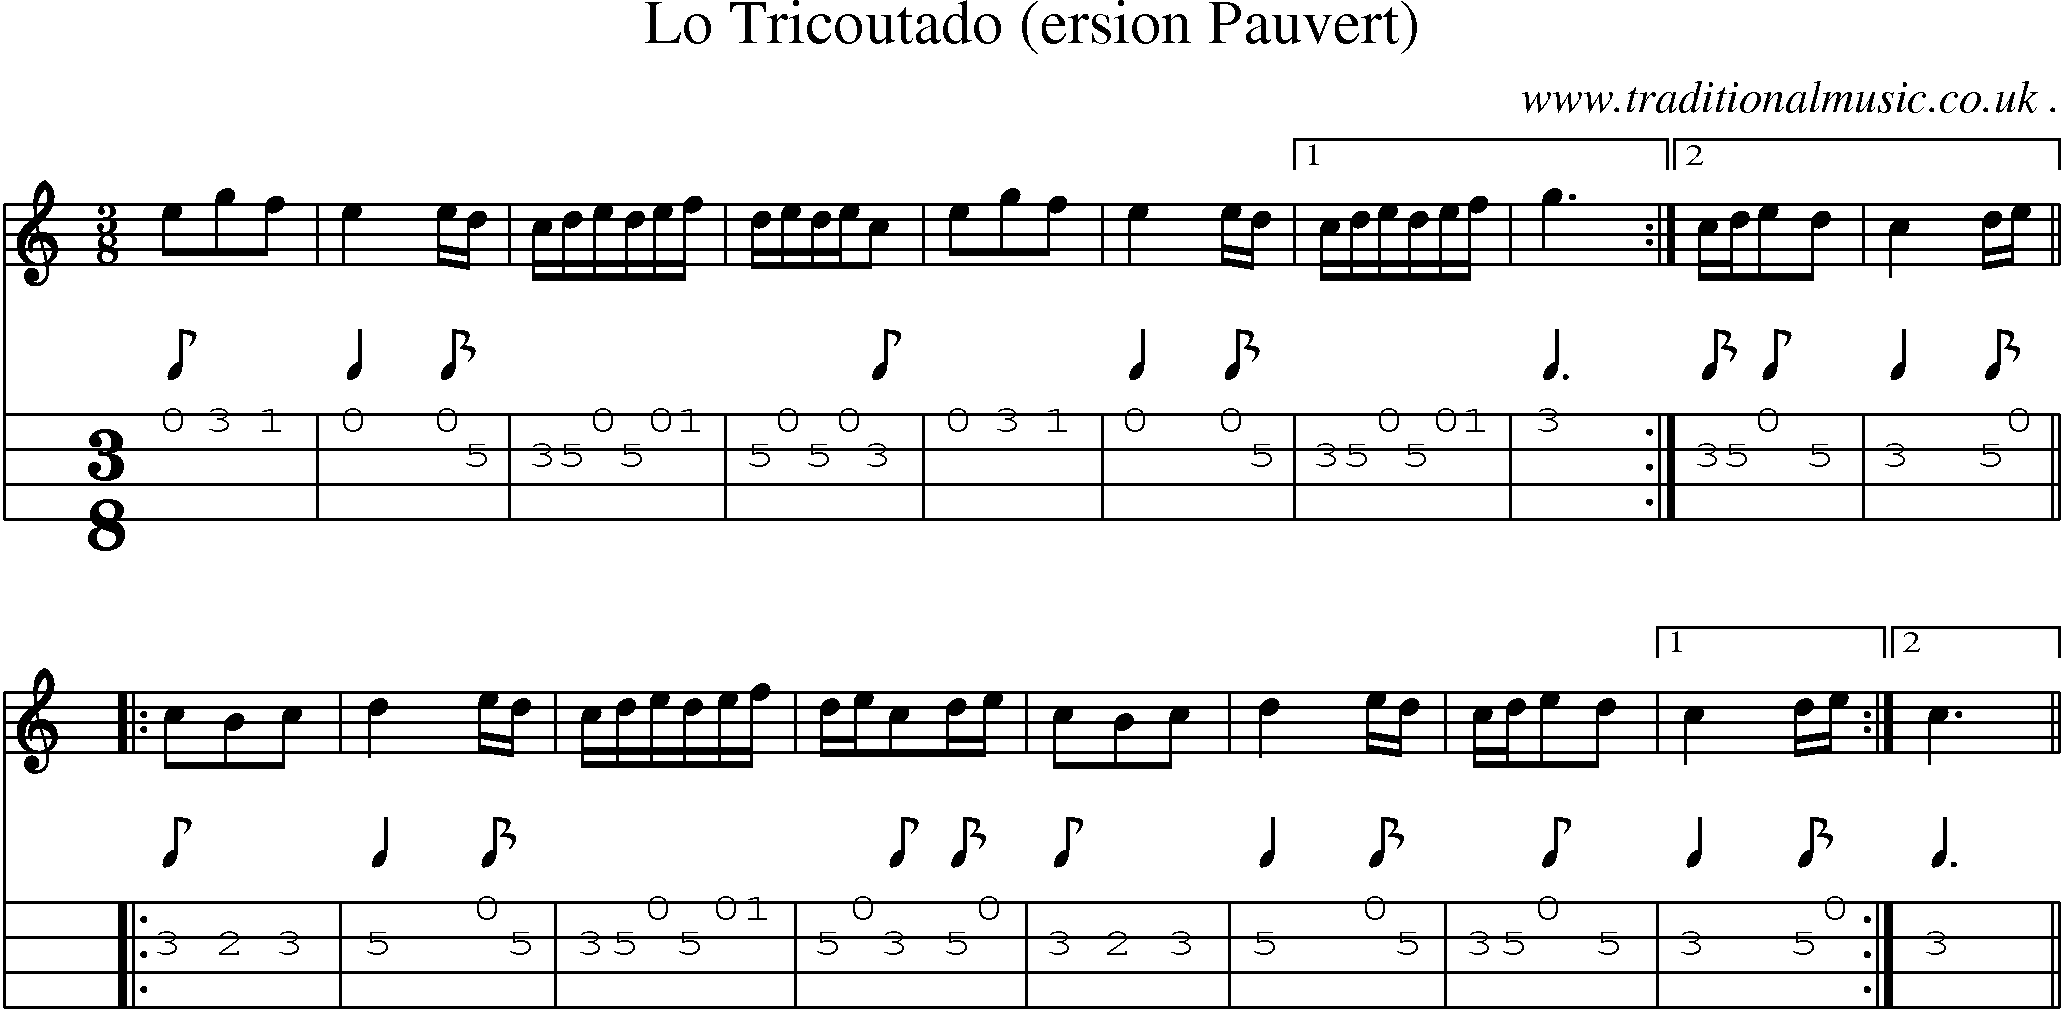 Sheet-Music and Mandolin Tabs for Lo Tricoutado (ersion Pauvert)